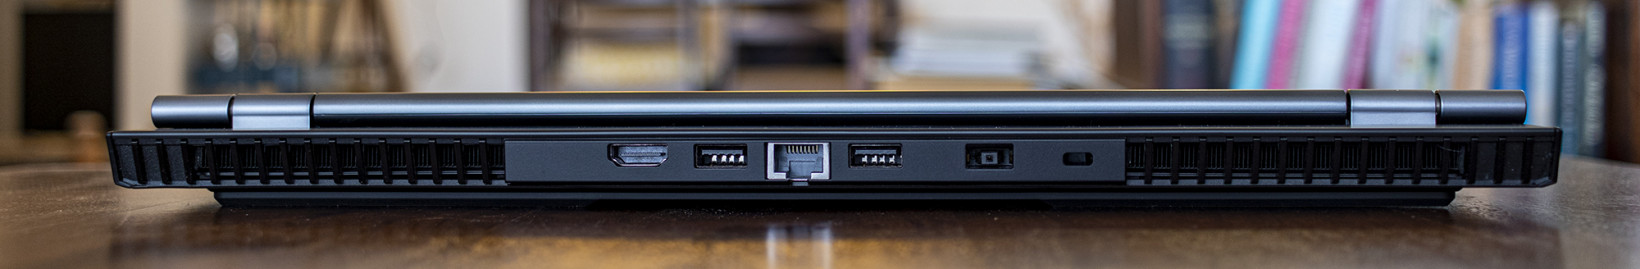 Can all laptops please follow this rear panel port layout please?